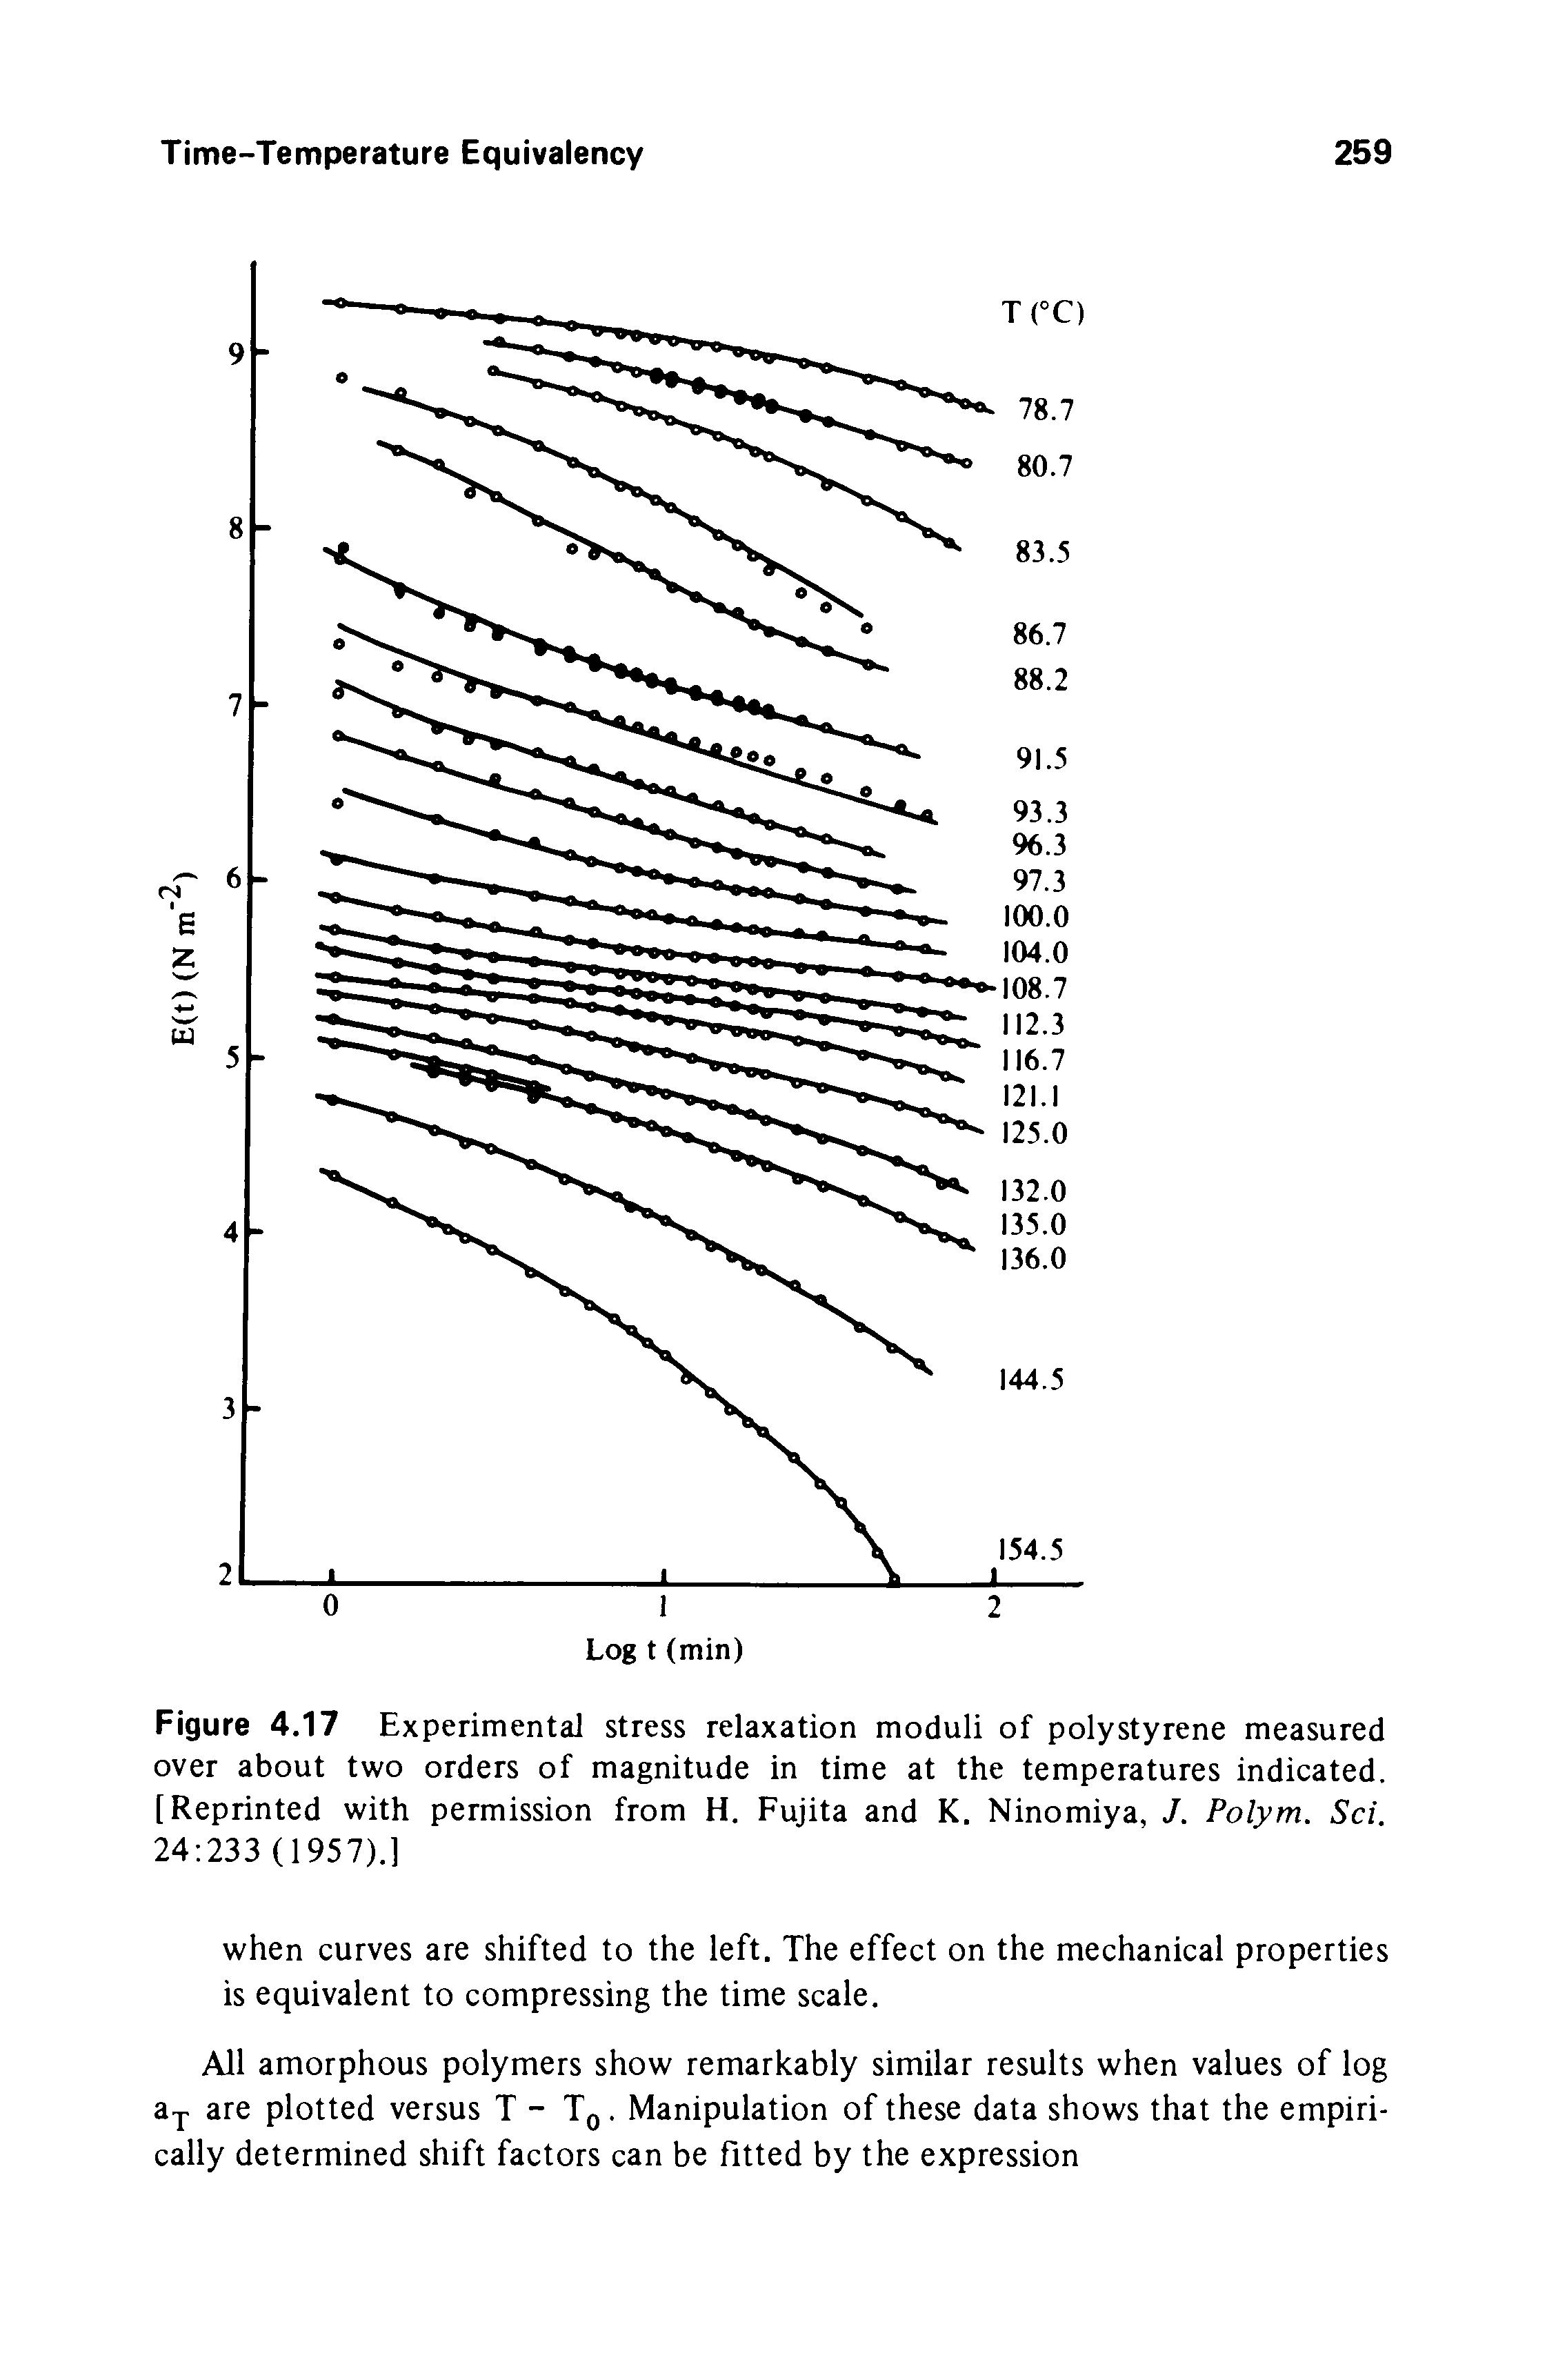 Figure 4.17 Experimental stress relaxation moduli of polystyrene measured over about two orders of magnitude in time at the temperatures indicated. [Reprinted with permission from H. Fujita and K. Ninomiya, J. Polym. Sci. 24 233 (1957).]...